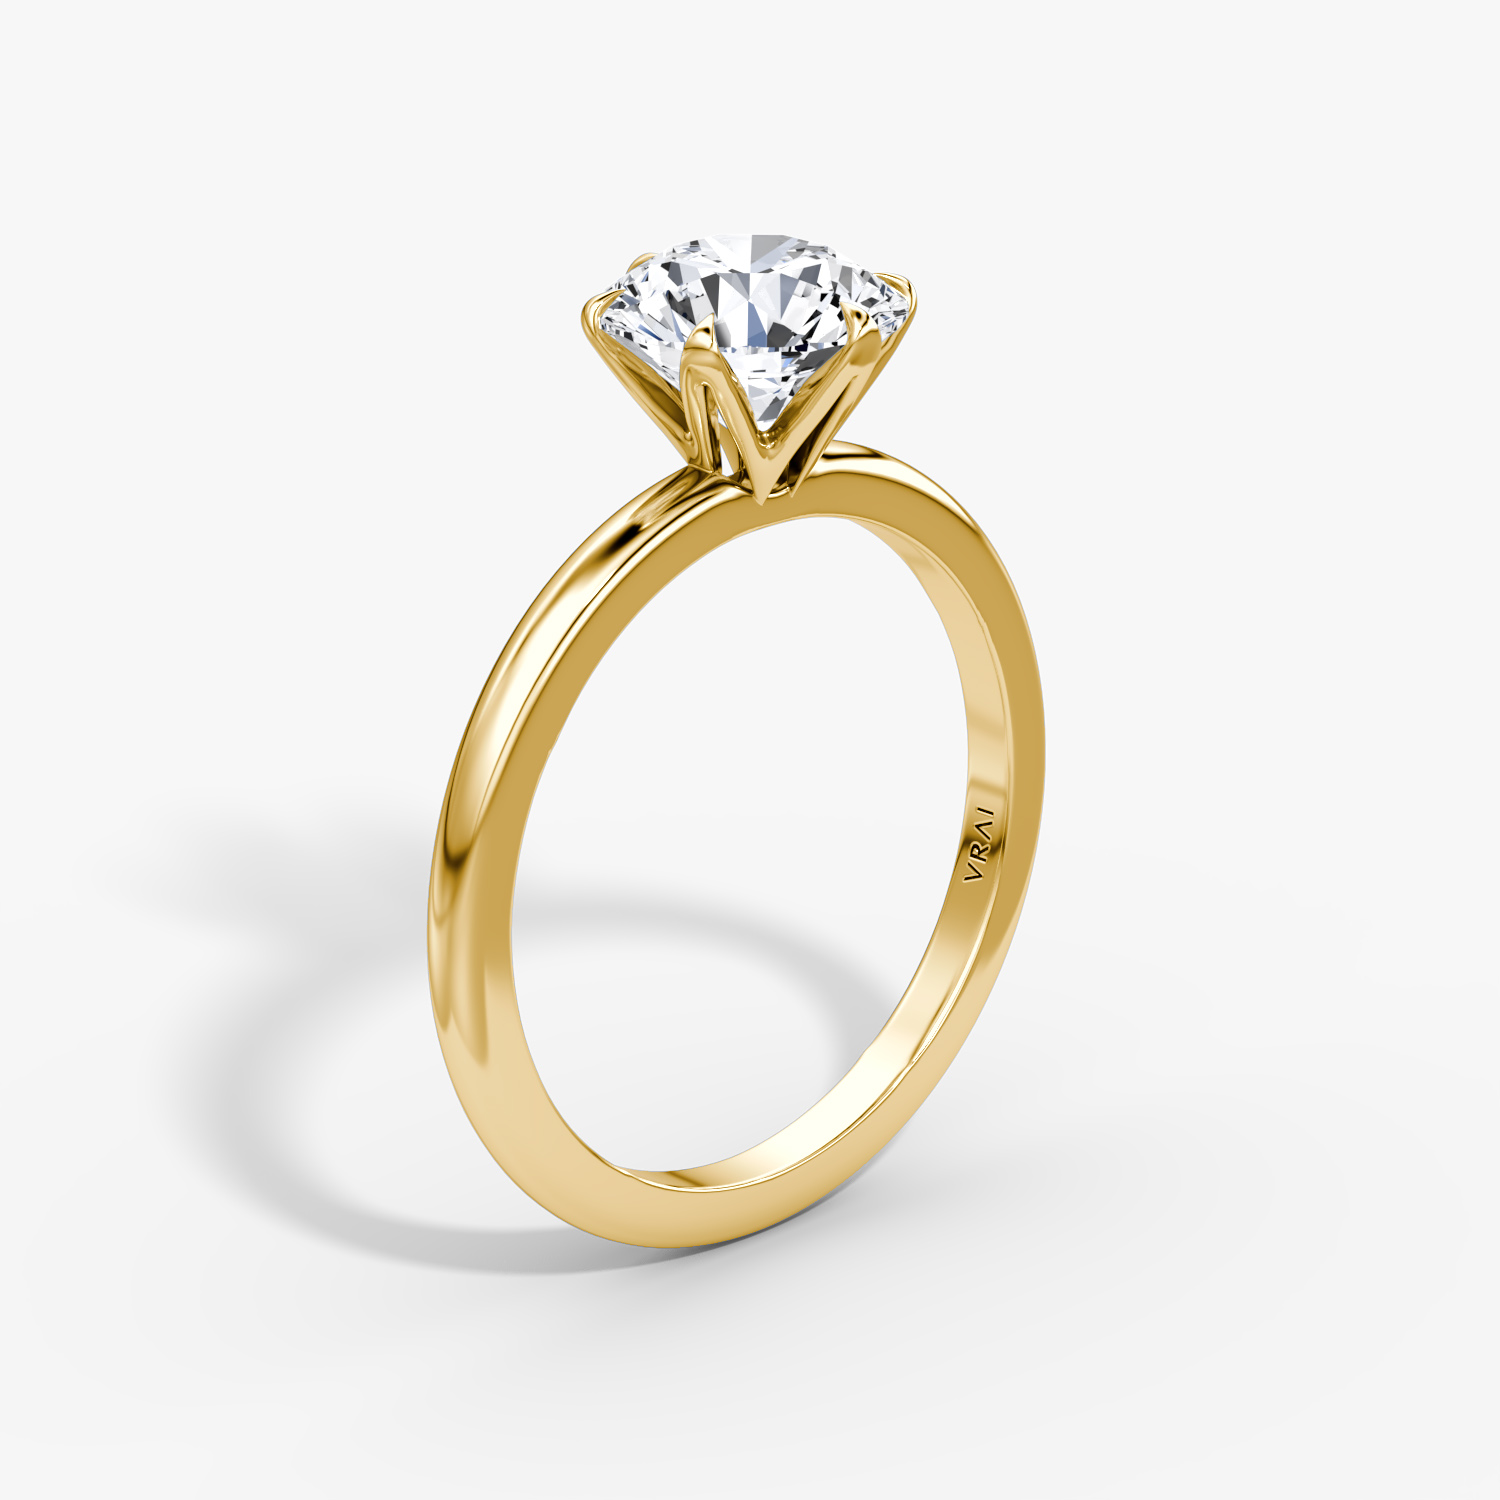 The Most Popular Engagement Ring Settings in 2021 | Blue Nile